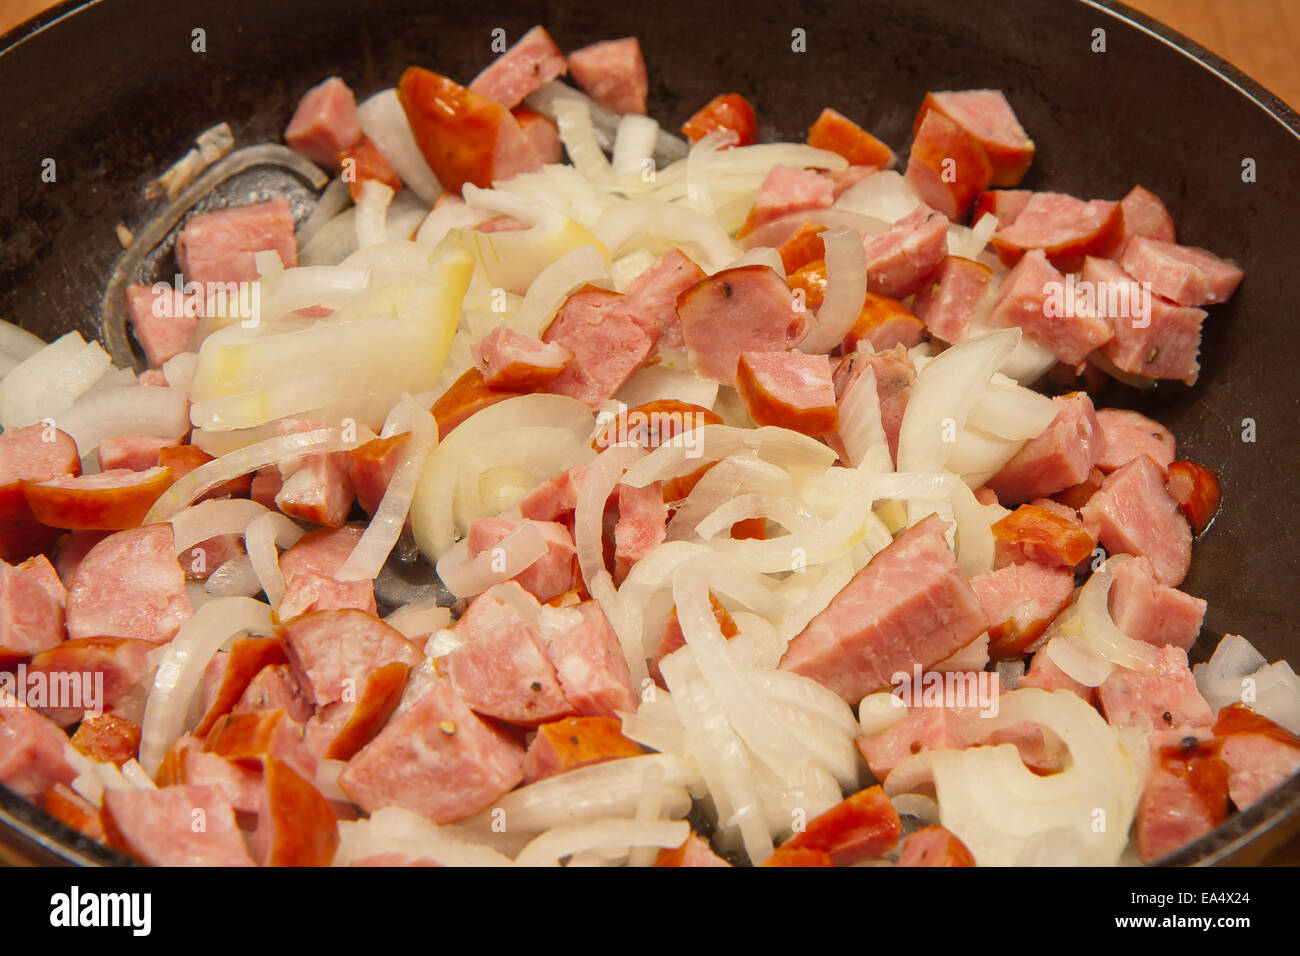 Sliced sausage and onion, on a frying pan, ready to be fried. Stock Photo